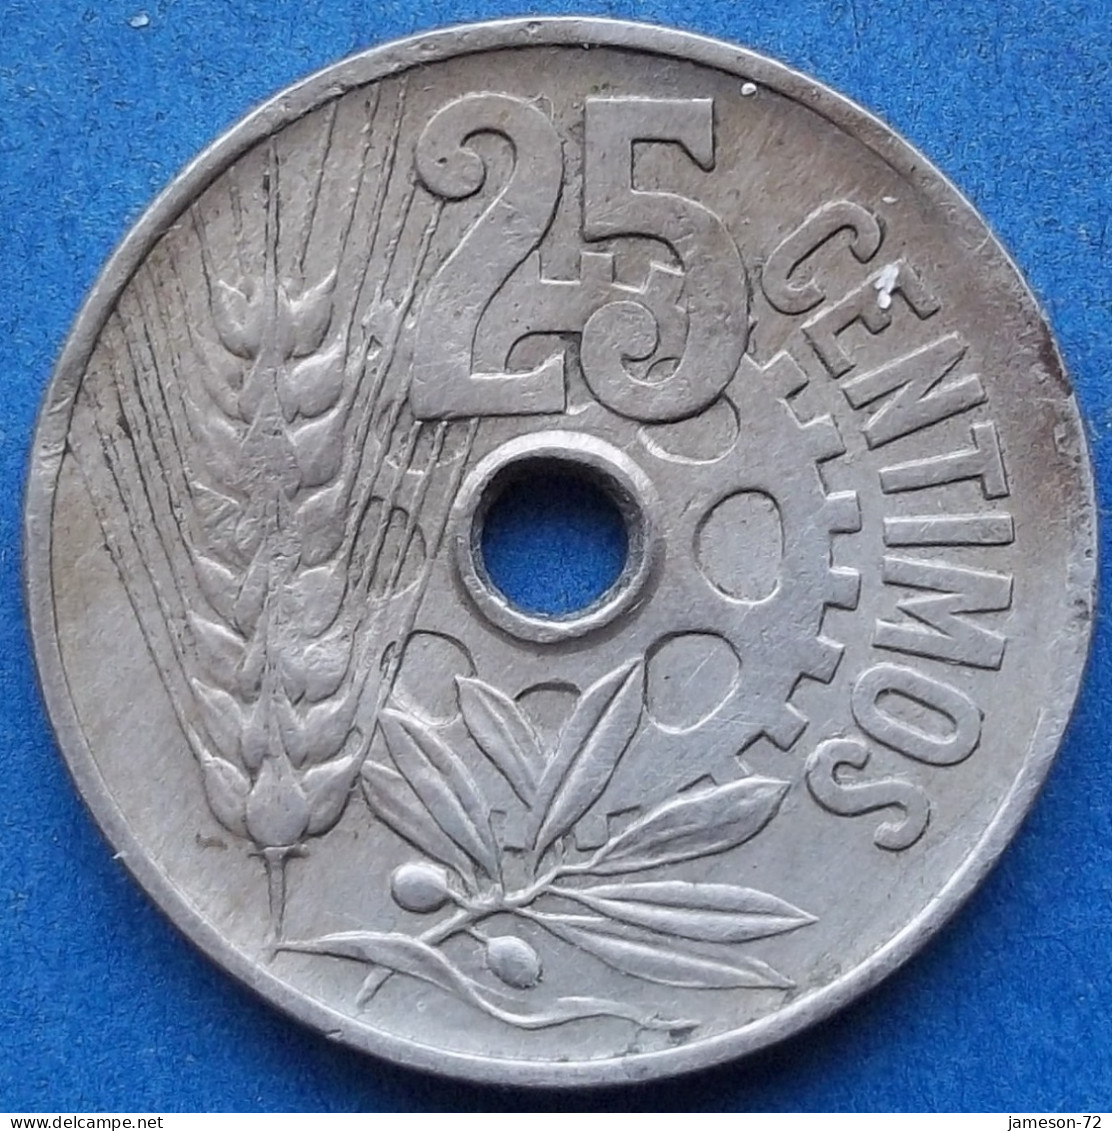 SPAIN - 25 Centimos 1934 "Republic Holding A Olive Branch" KM# 751 II Republic (1931-1939) - Edelweiss Coins - 25 Centimos